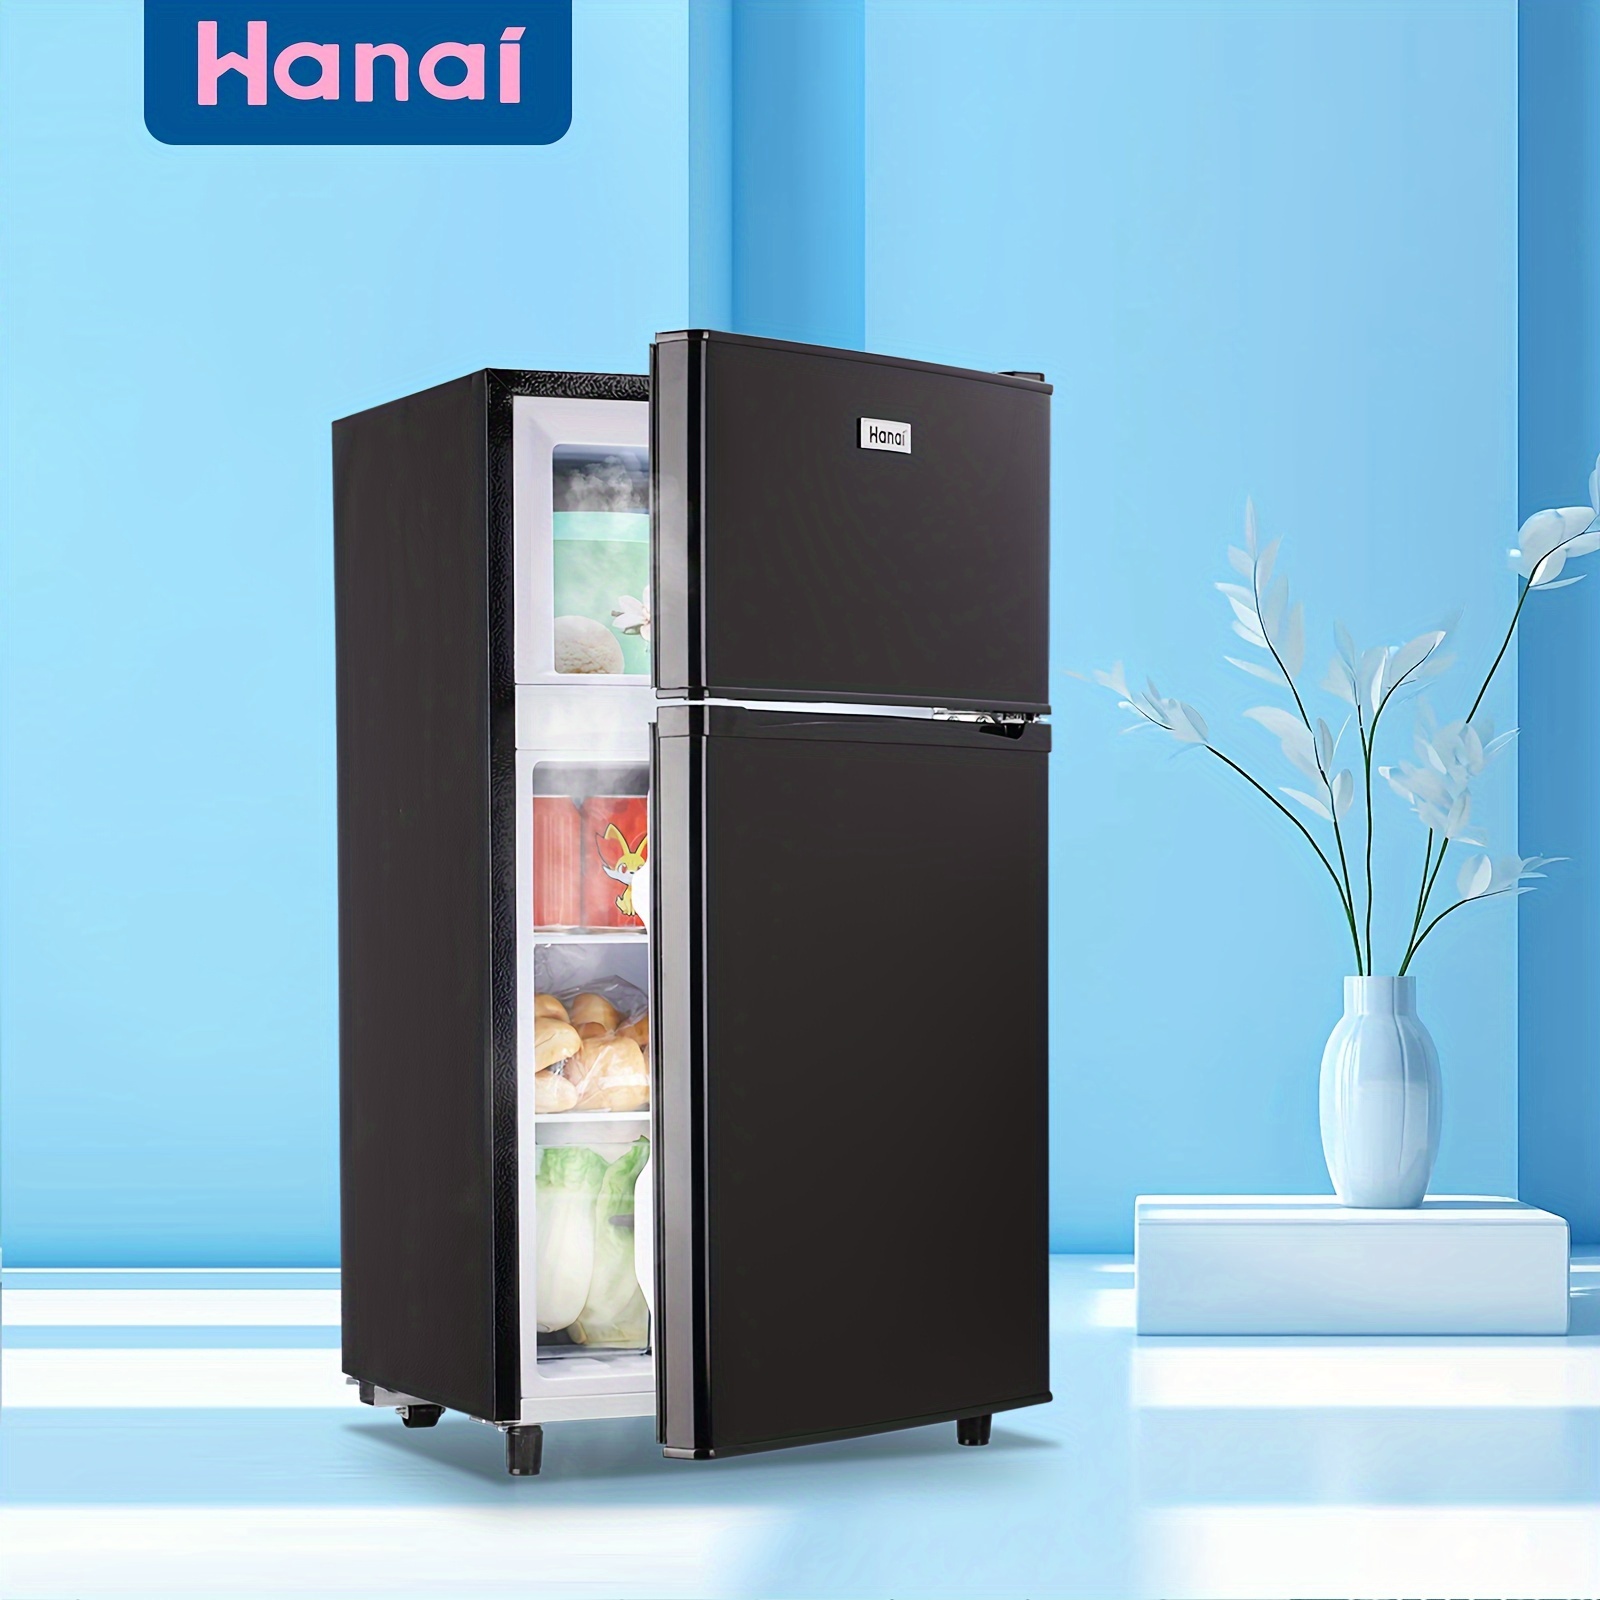 

Wanai Double Door Small Refrigerator With Freezer-on-top, 3.5 Cubic Feet Mini Fridge With 7-level Adjustable Thermostat For Office, Dorm, Bedroom, Home And Apartment